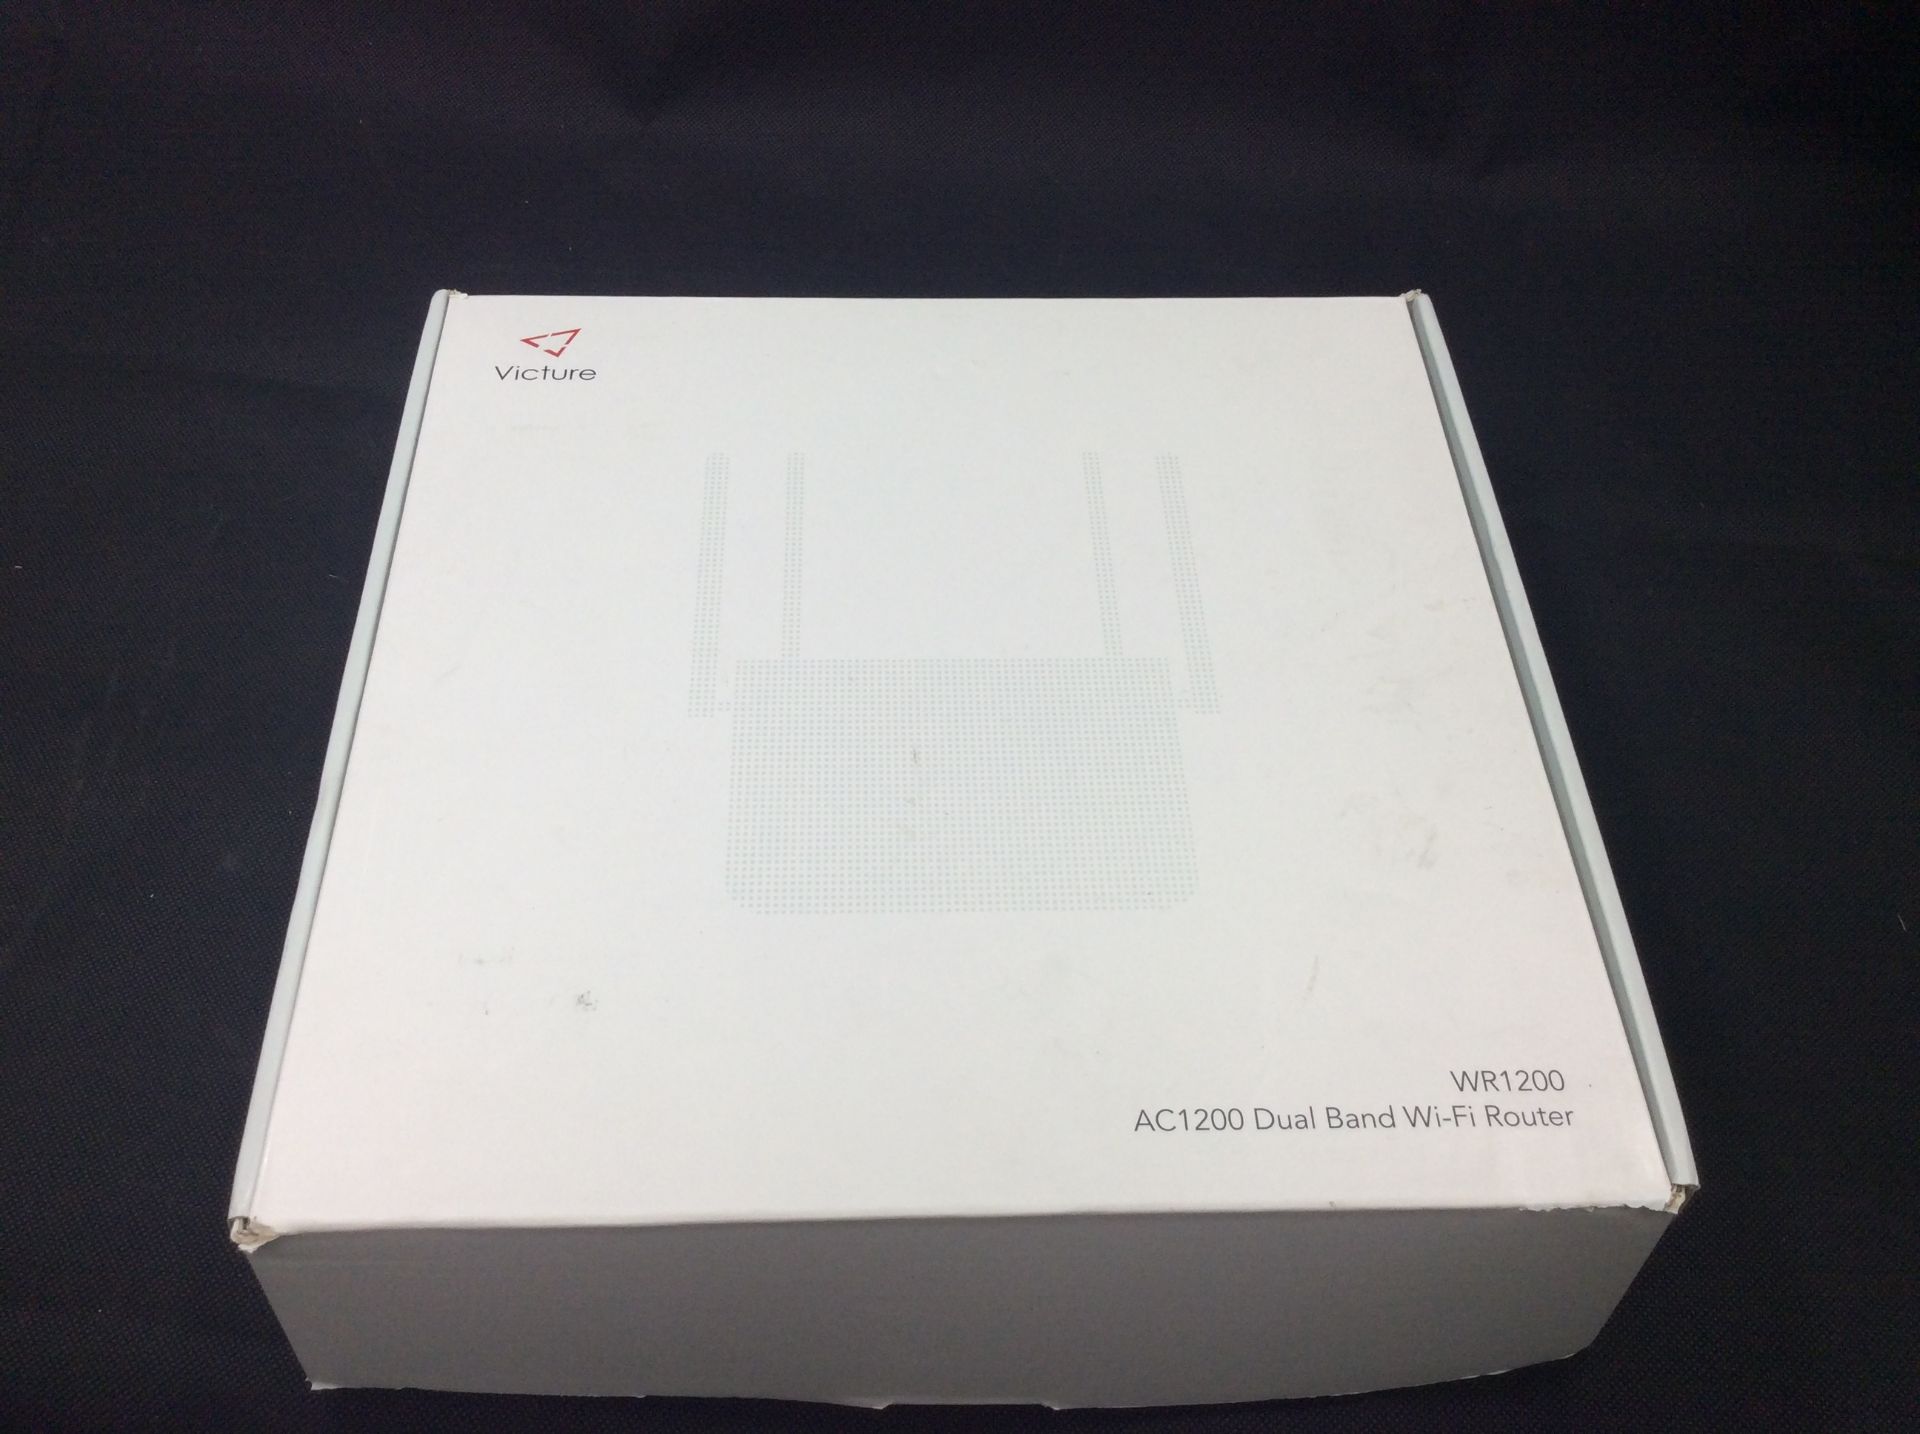 Victure wr1200 ac1200 dual band wifi router - Image 2 of 2